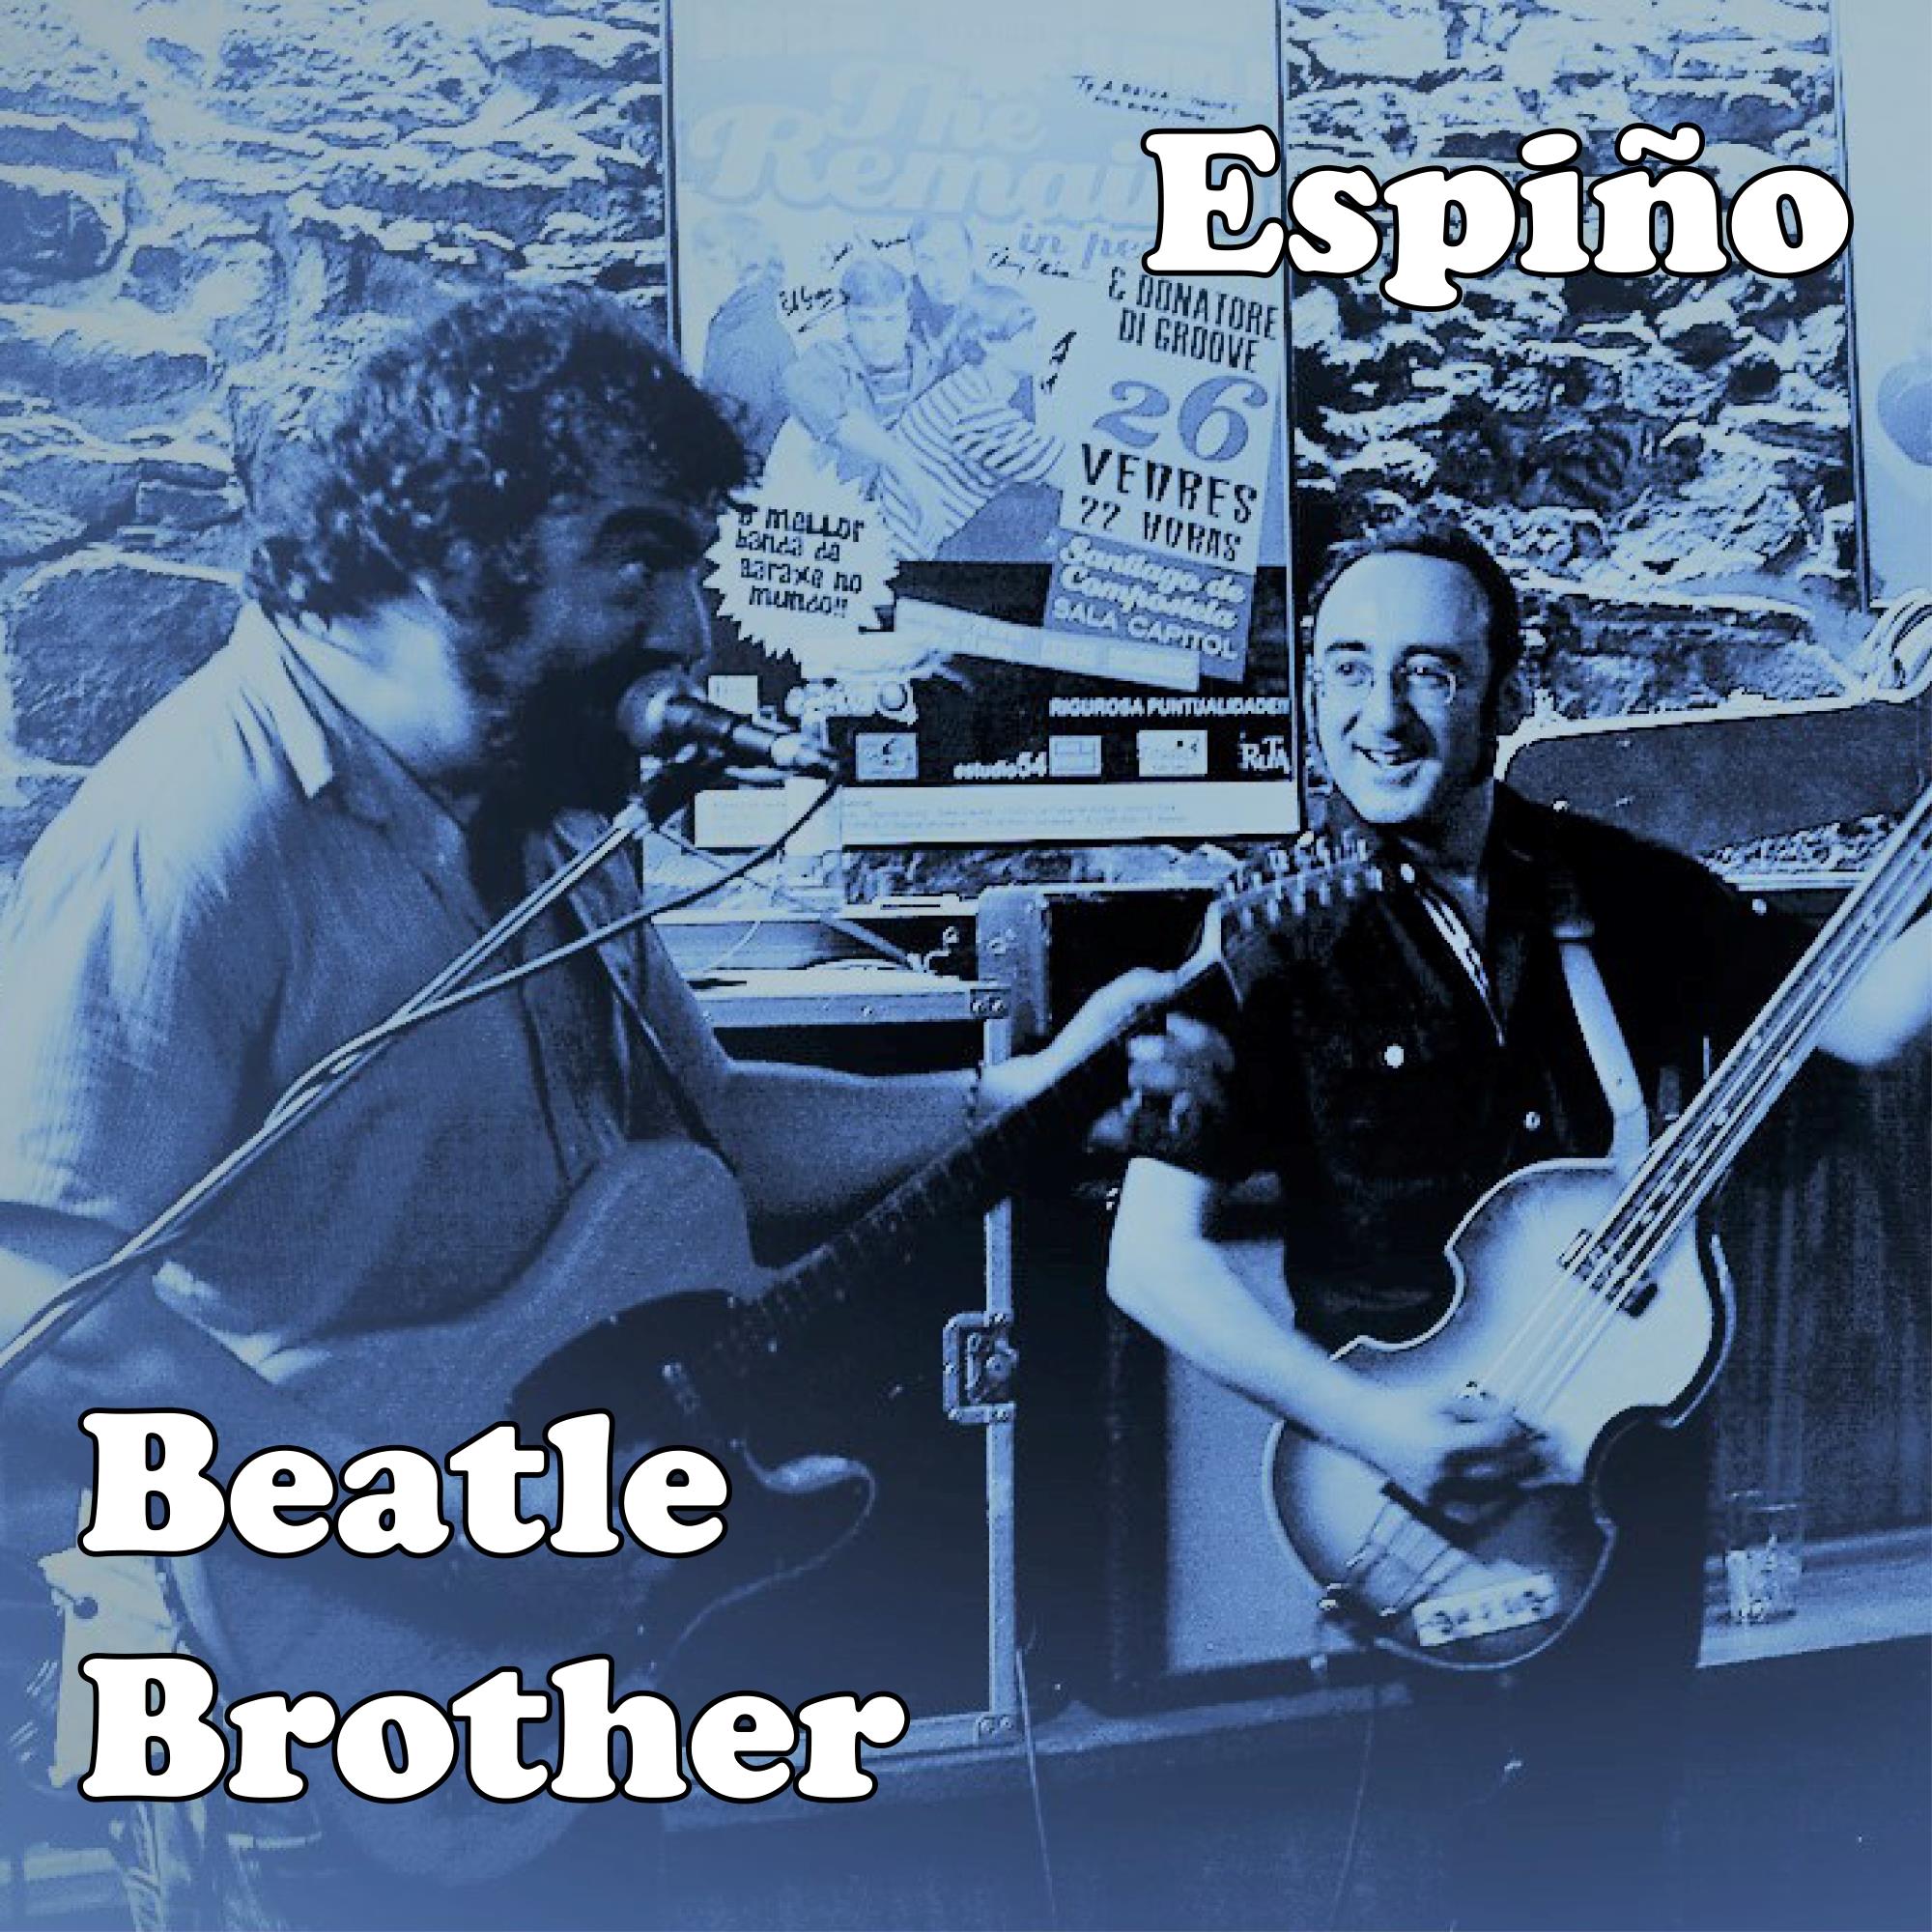 Demo 1 (Beatle Brother)